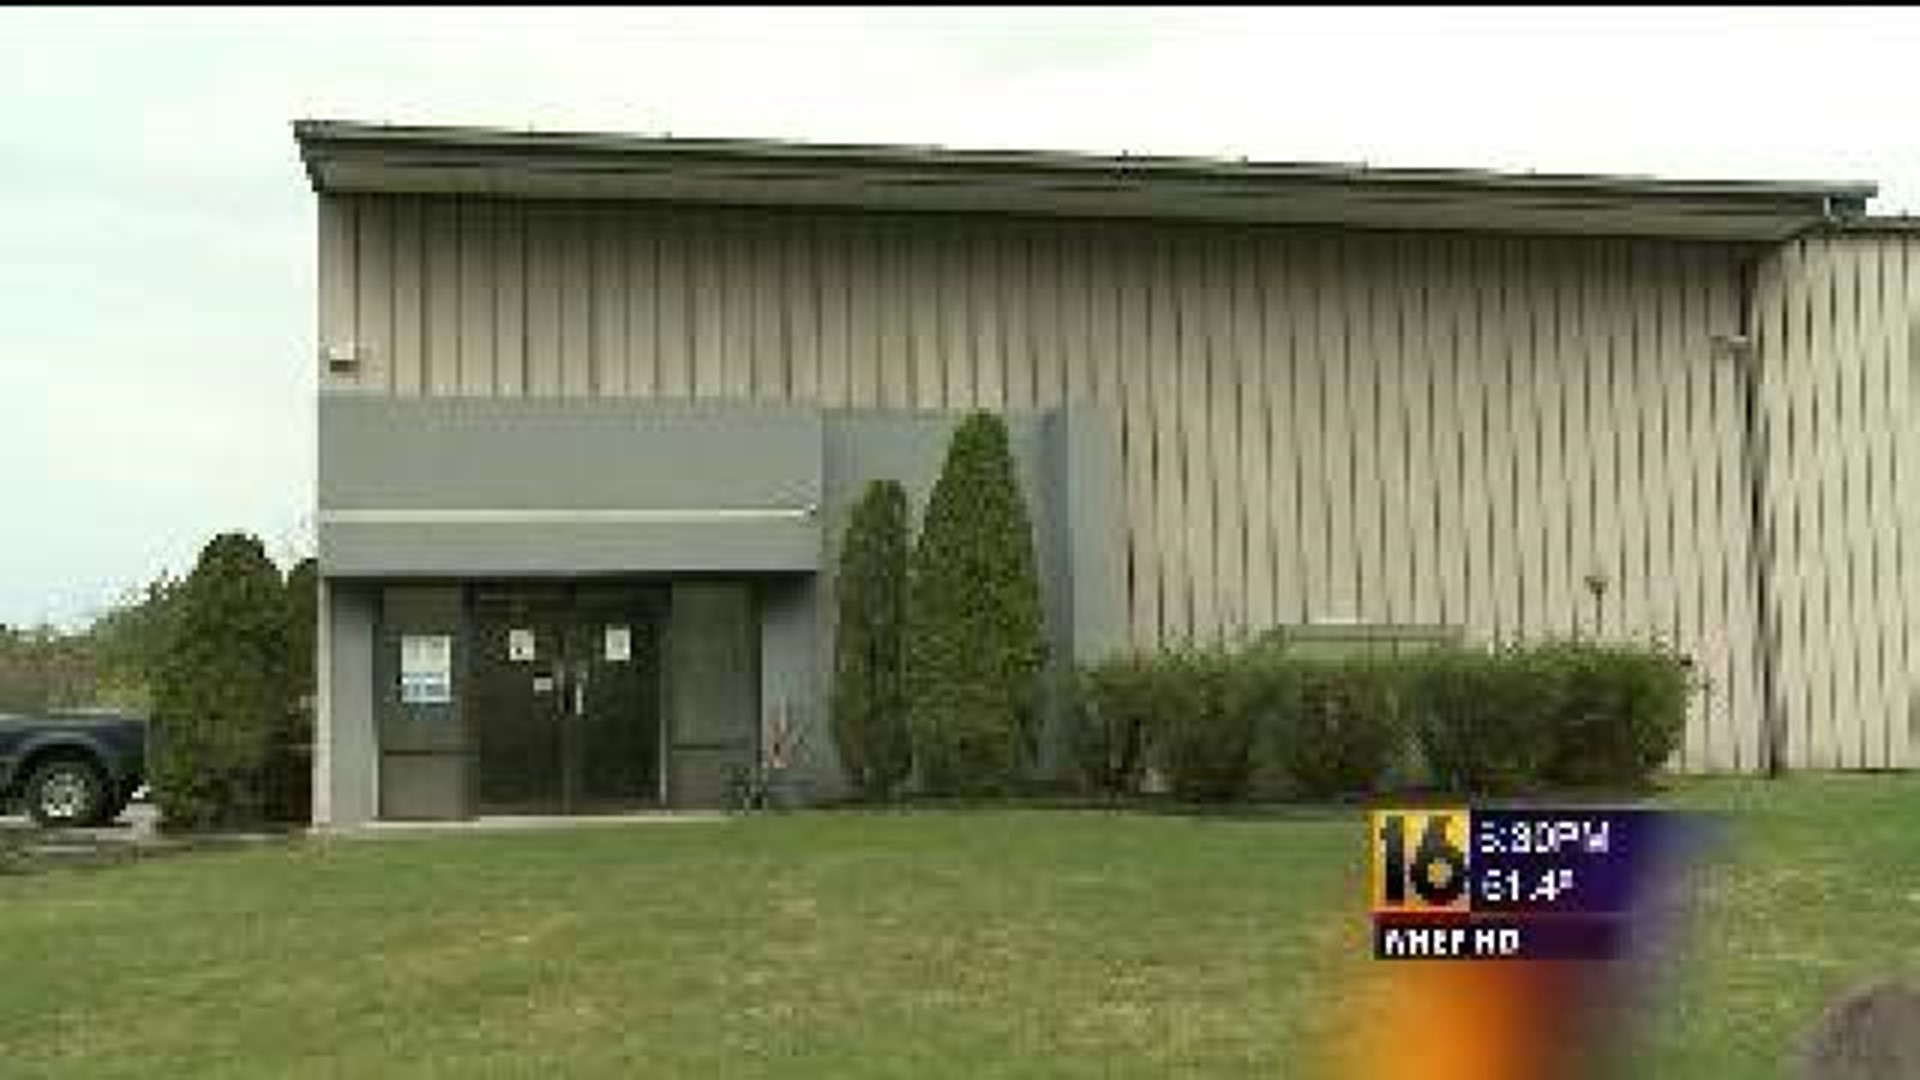 New Jobs Coming to Luzerne County